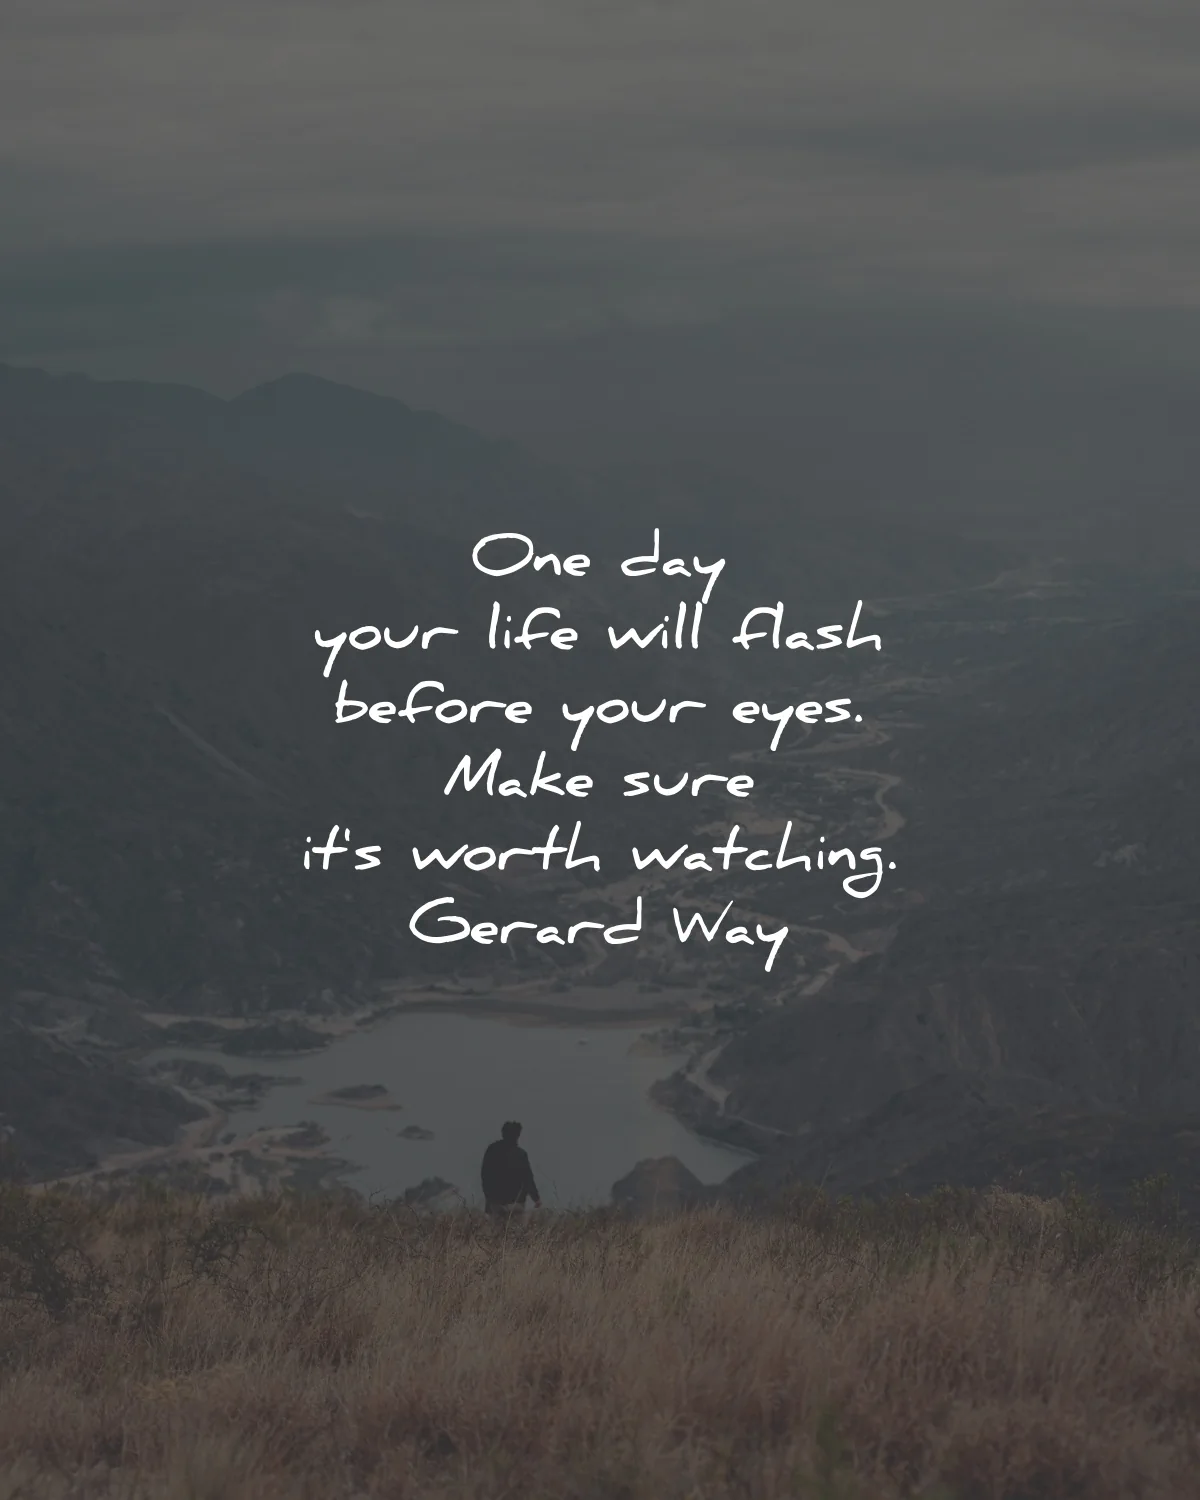 life is short quotes one day flash before eyes worth watching gerard way wisdom